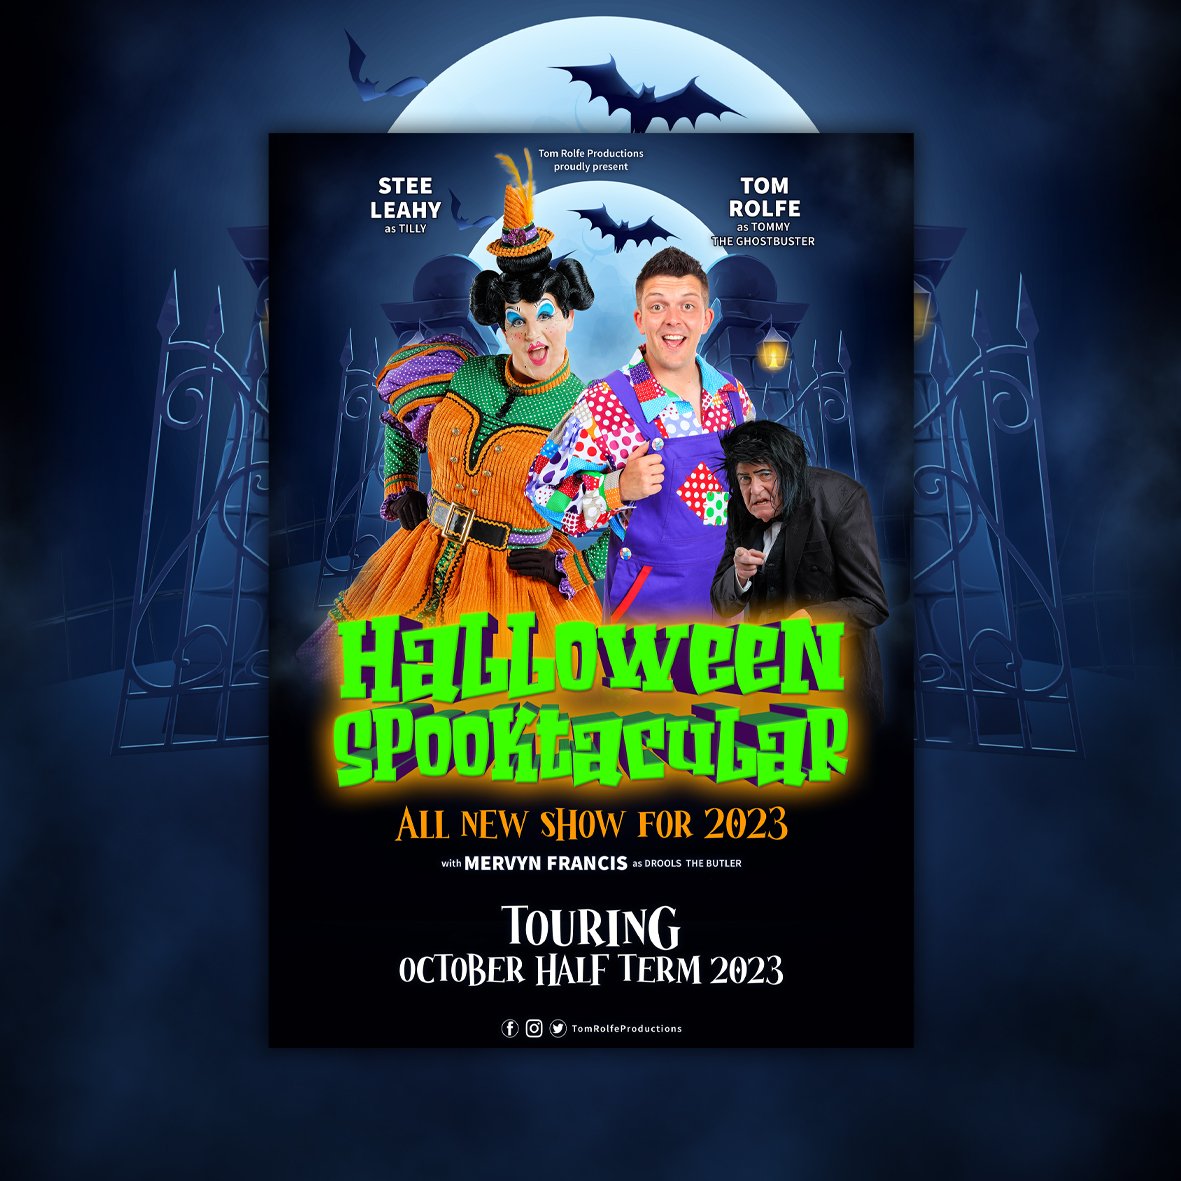 Halloween | Eye-catching Posters and Merchandise Designed by Hot Rock Group